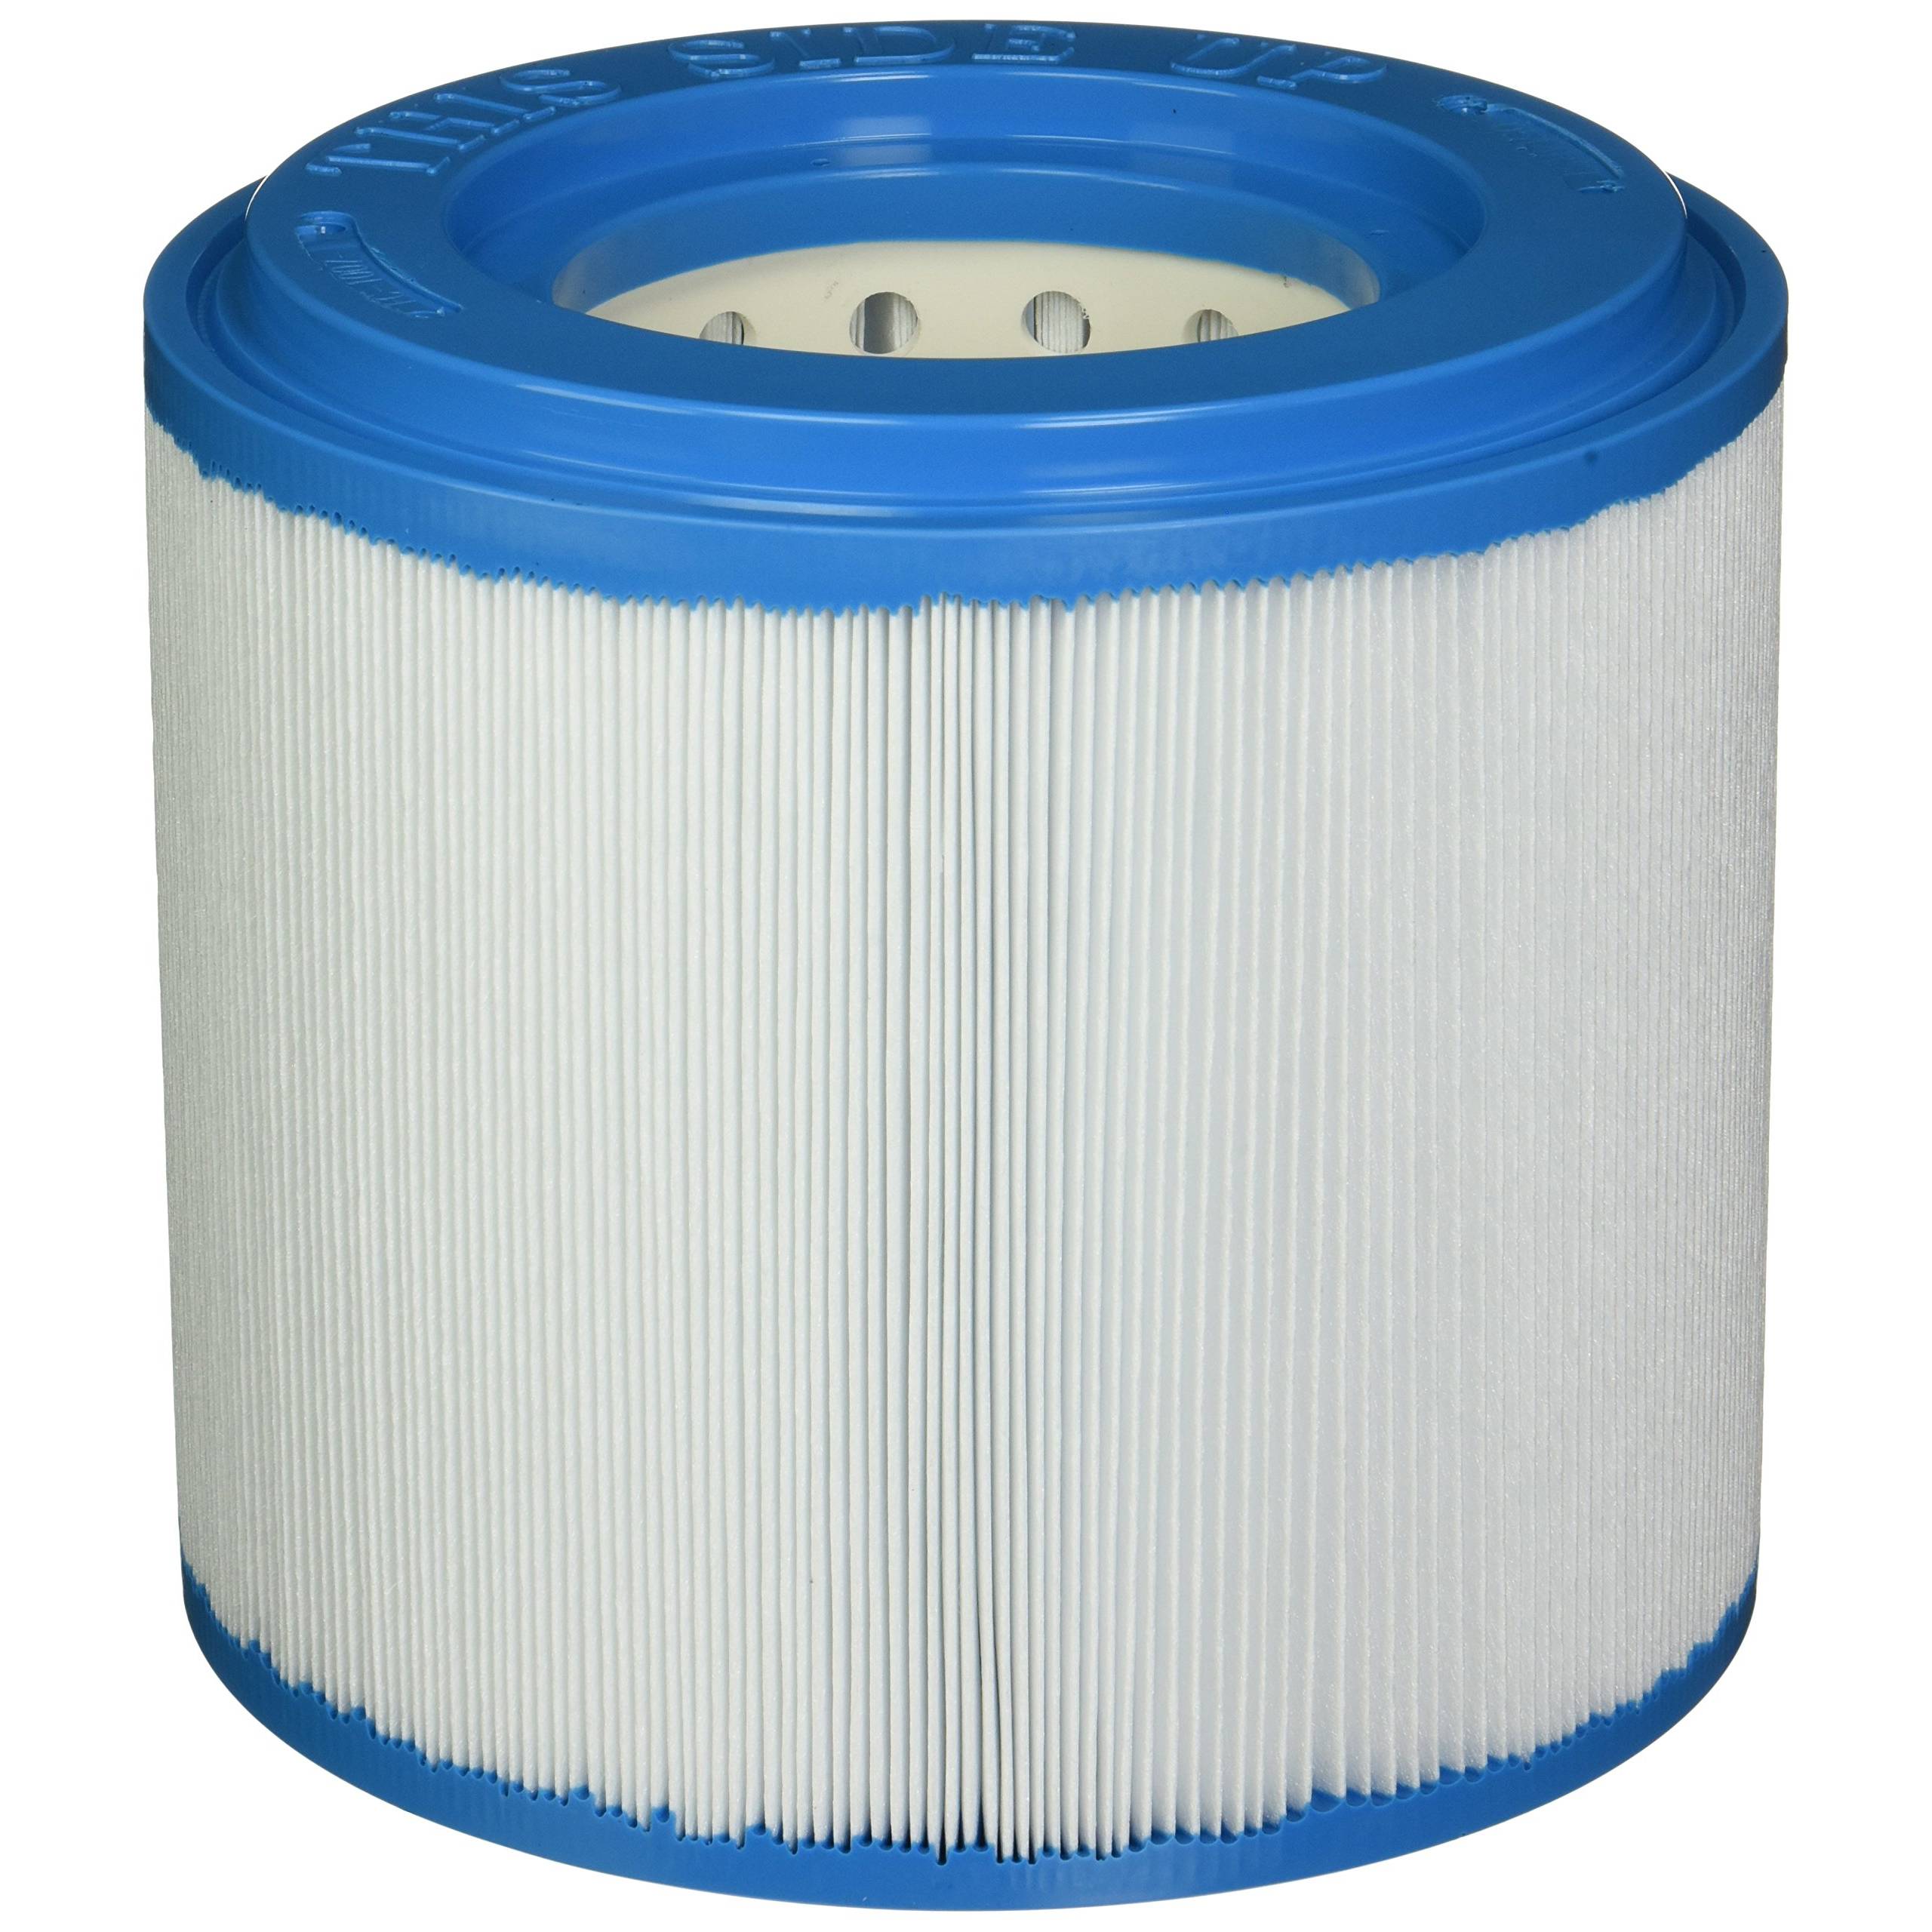 Filters Fast FF-1007 Replacement for Filbur FC-1007